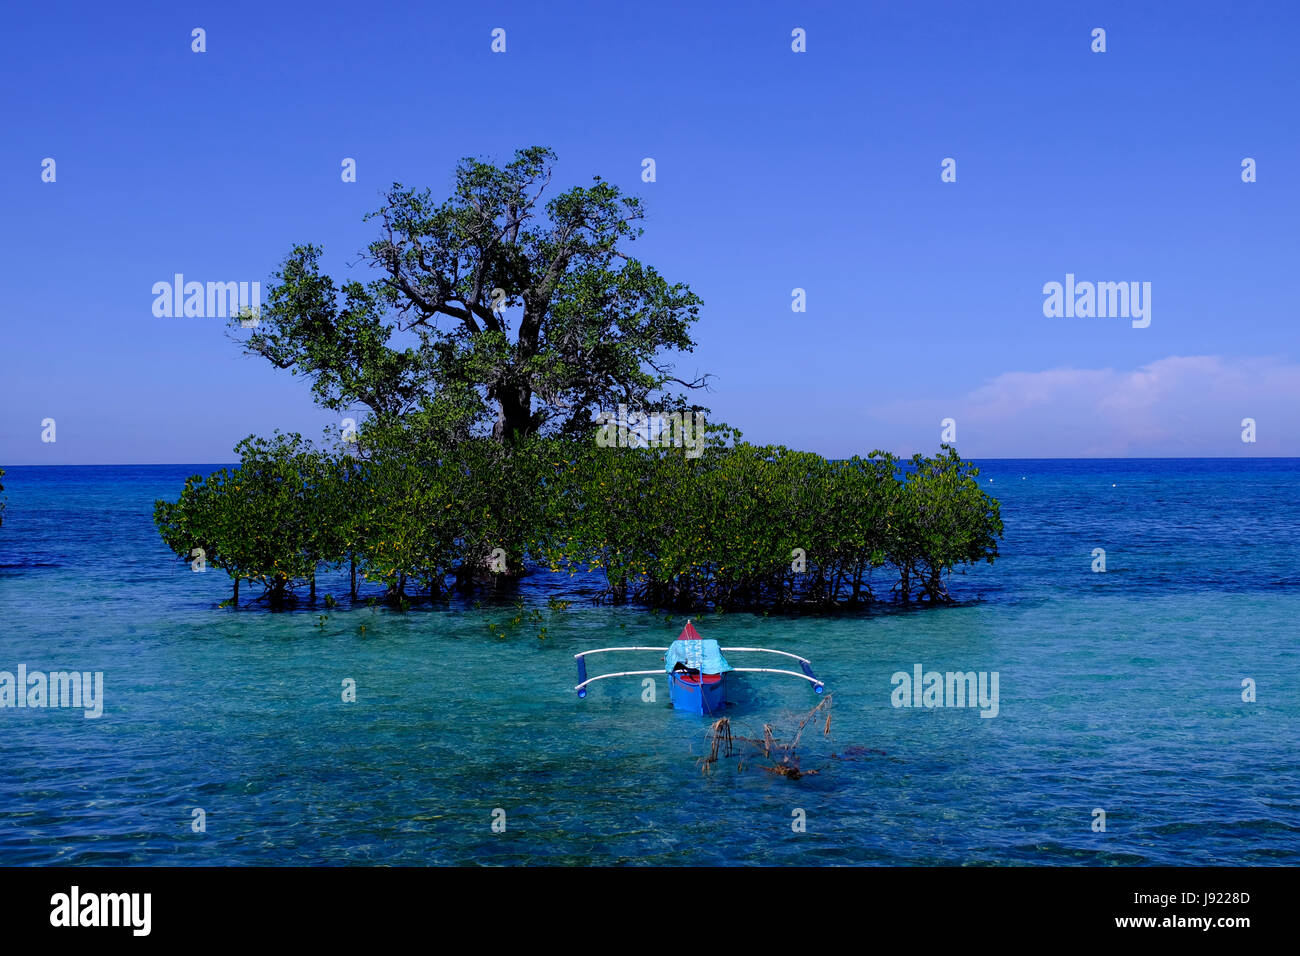 A traditional banka outrigger boat anchored by a mangrove tree at the northwest seashore of Siquijor located in the Central Visayas region of the Philippines Stock Photo